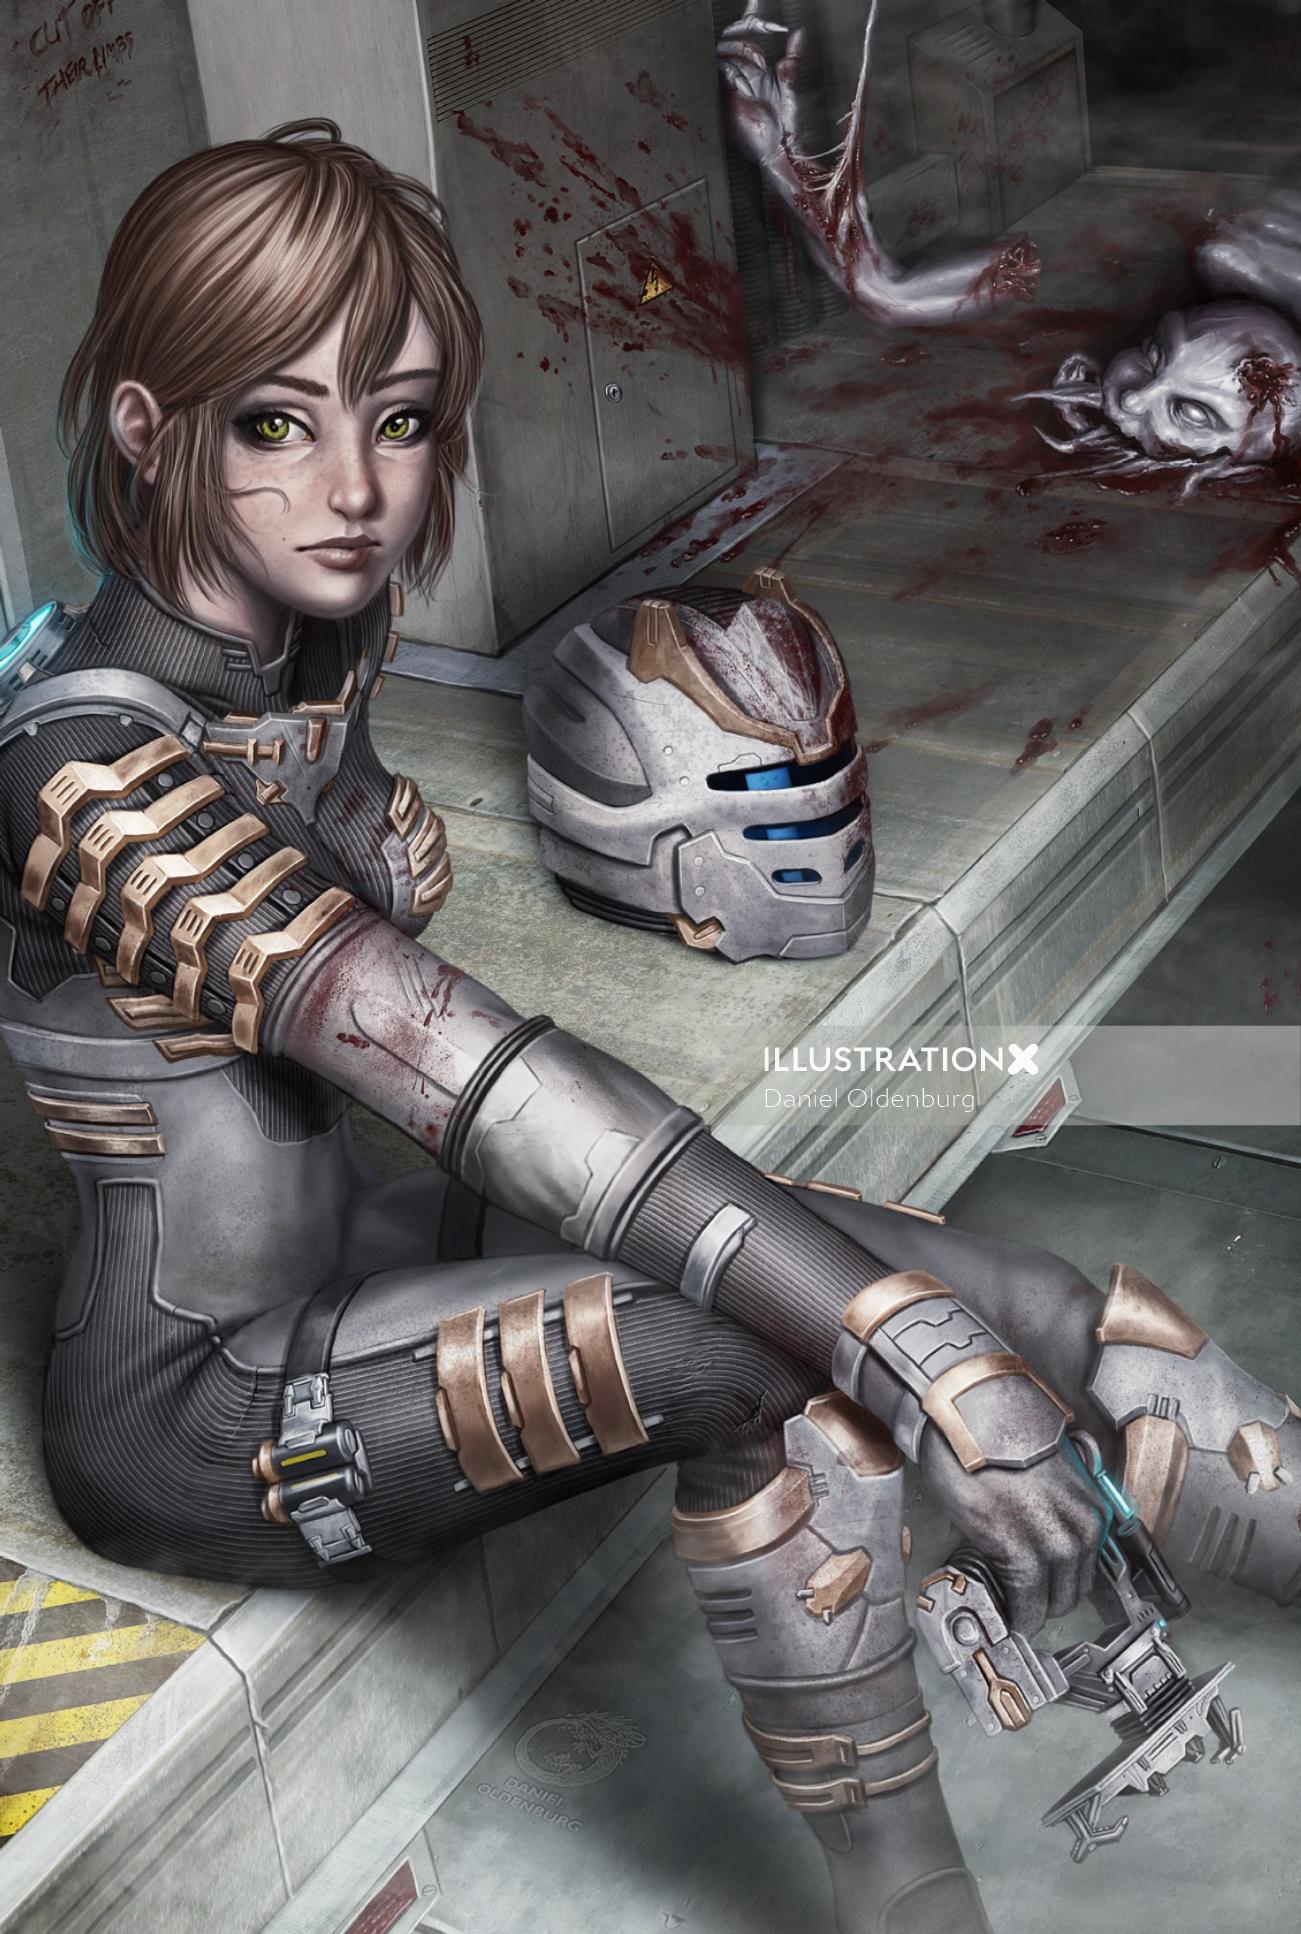 Character art from the horror game "Dead Space"